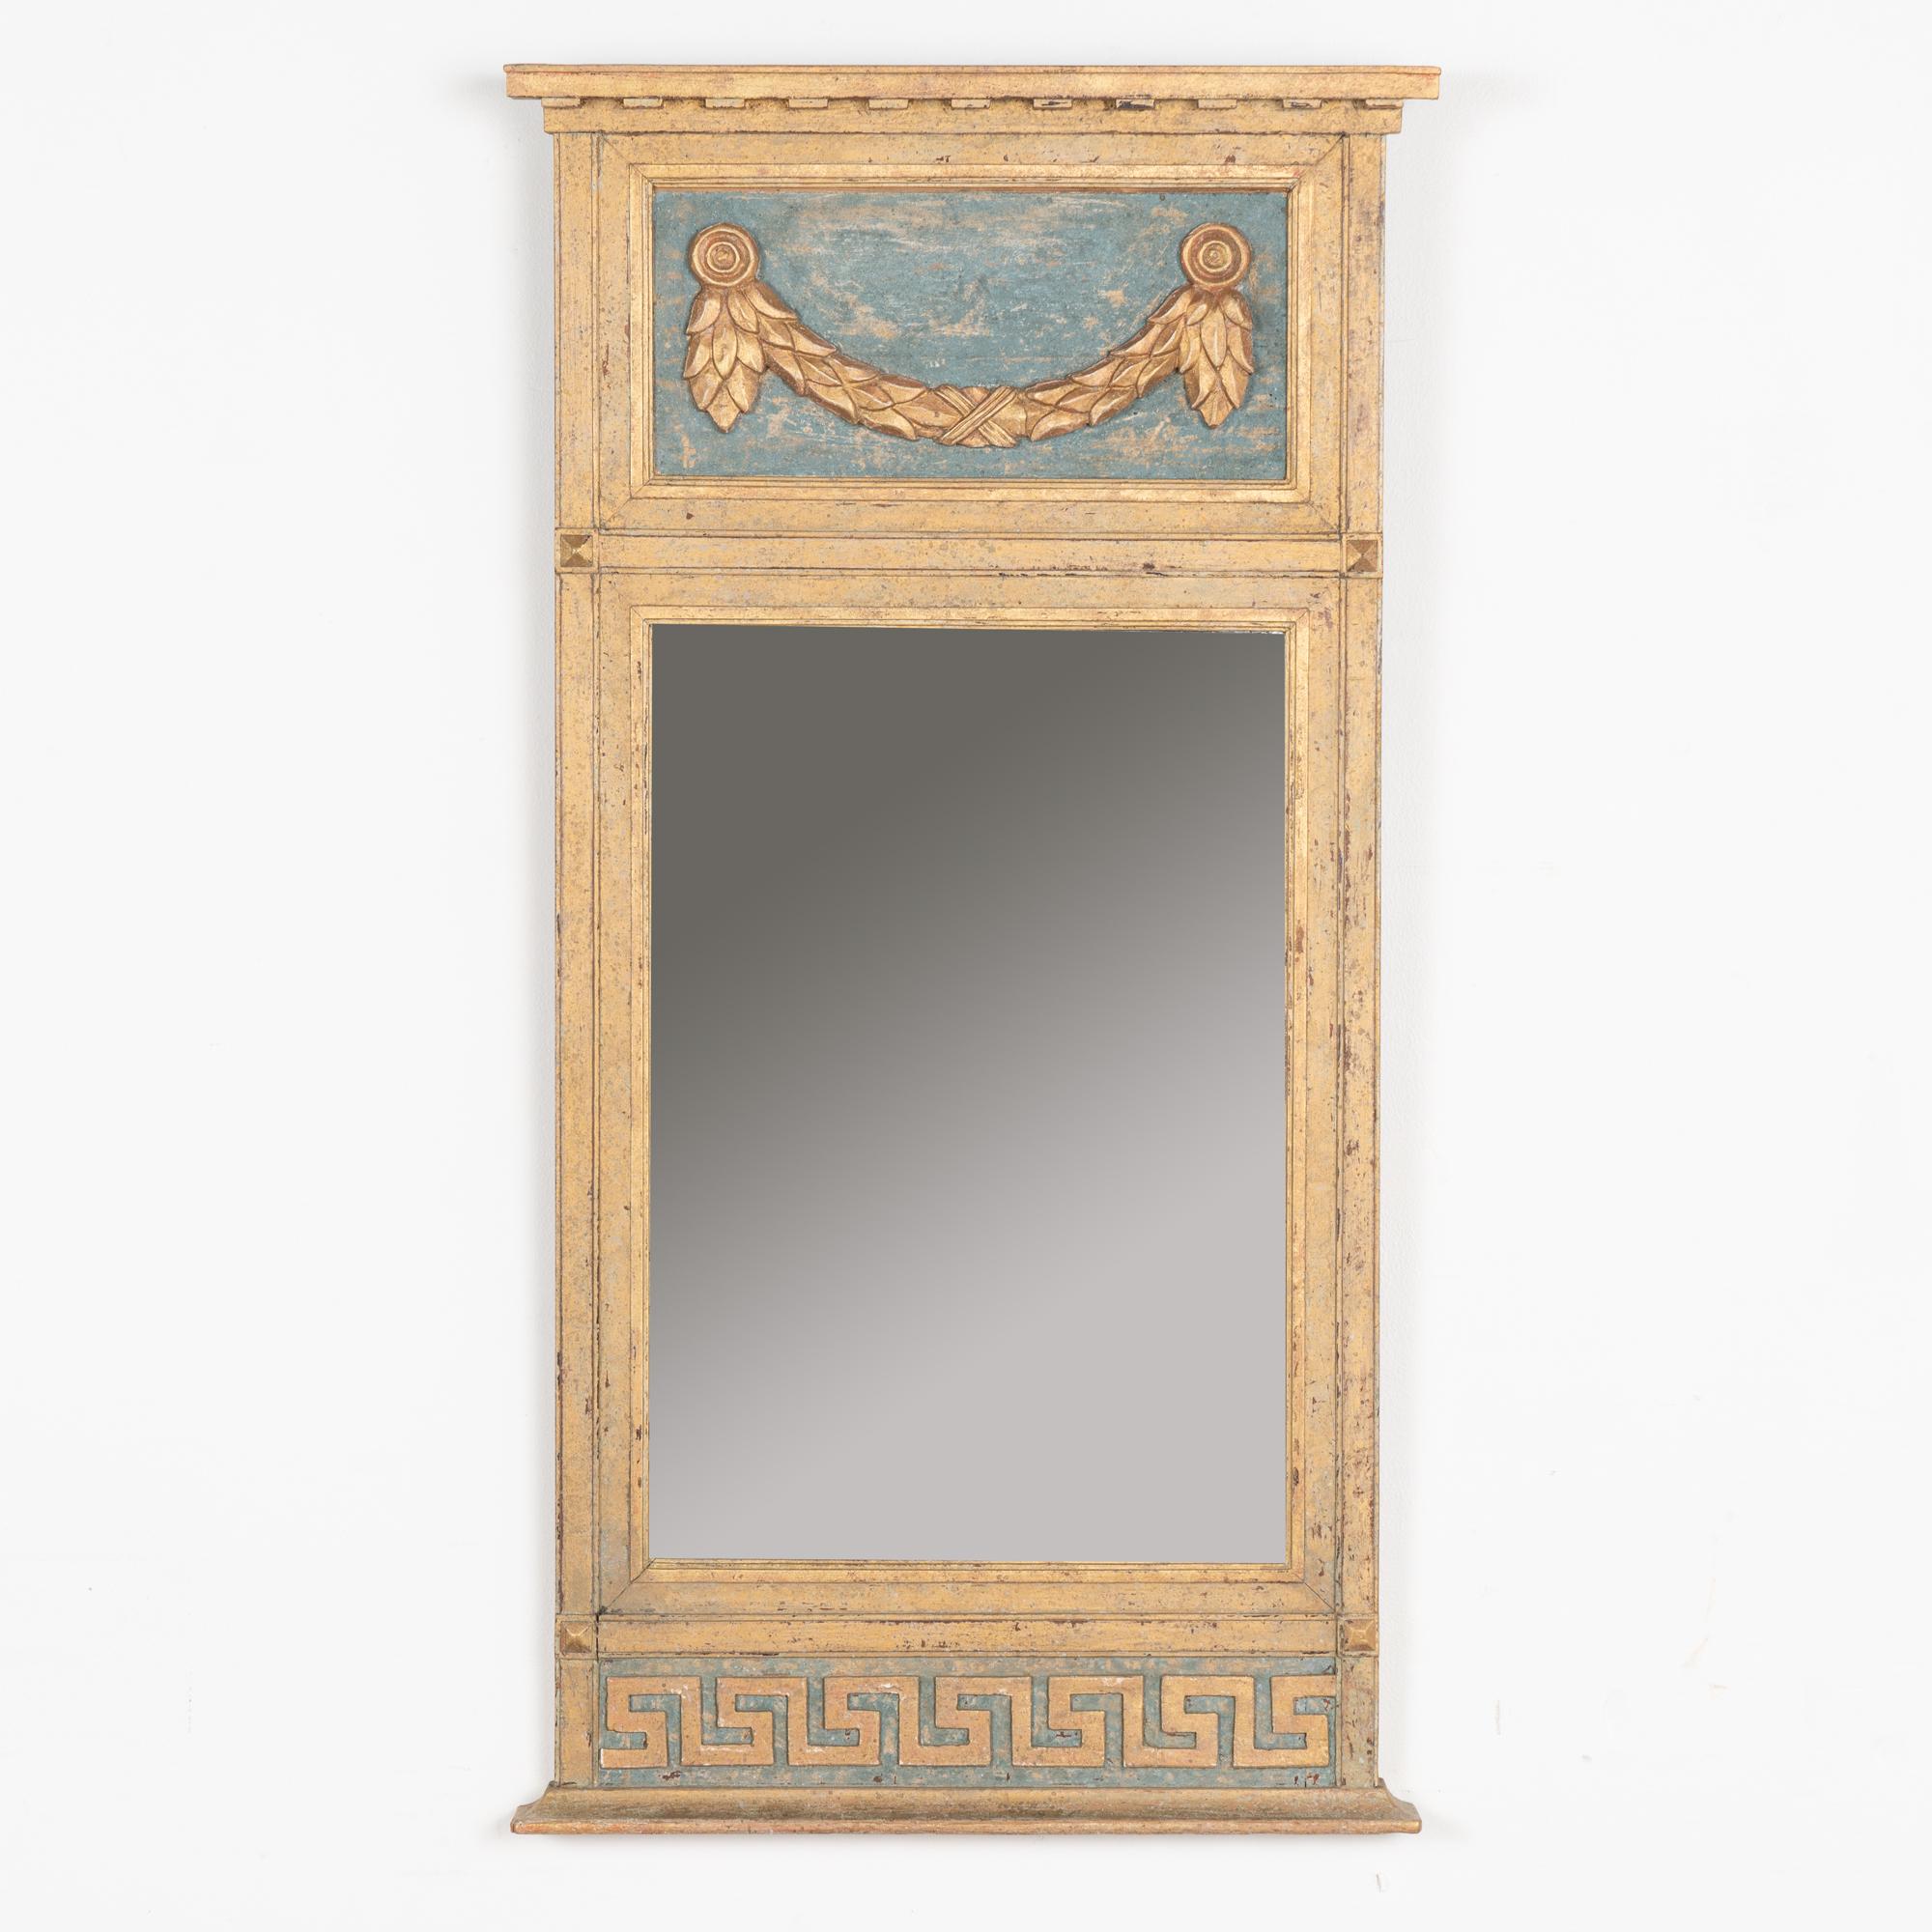 Lovely trumeau mirror with upper applied carved swag and lower Greek key pattern. At 3.5' tall, its size allows it to be displayed in a wide variety of spaces.
Restored, later professionally painted in layered shades of muted gold and blue (with